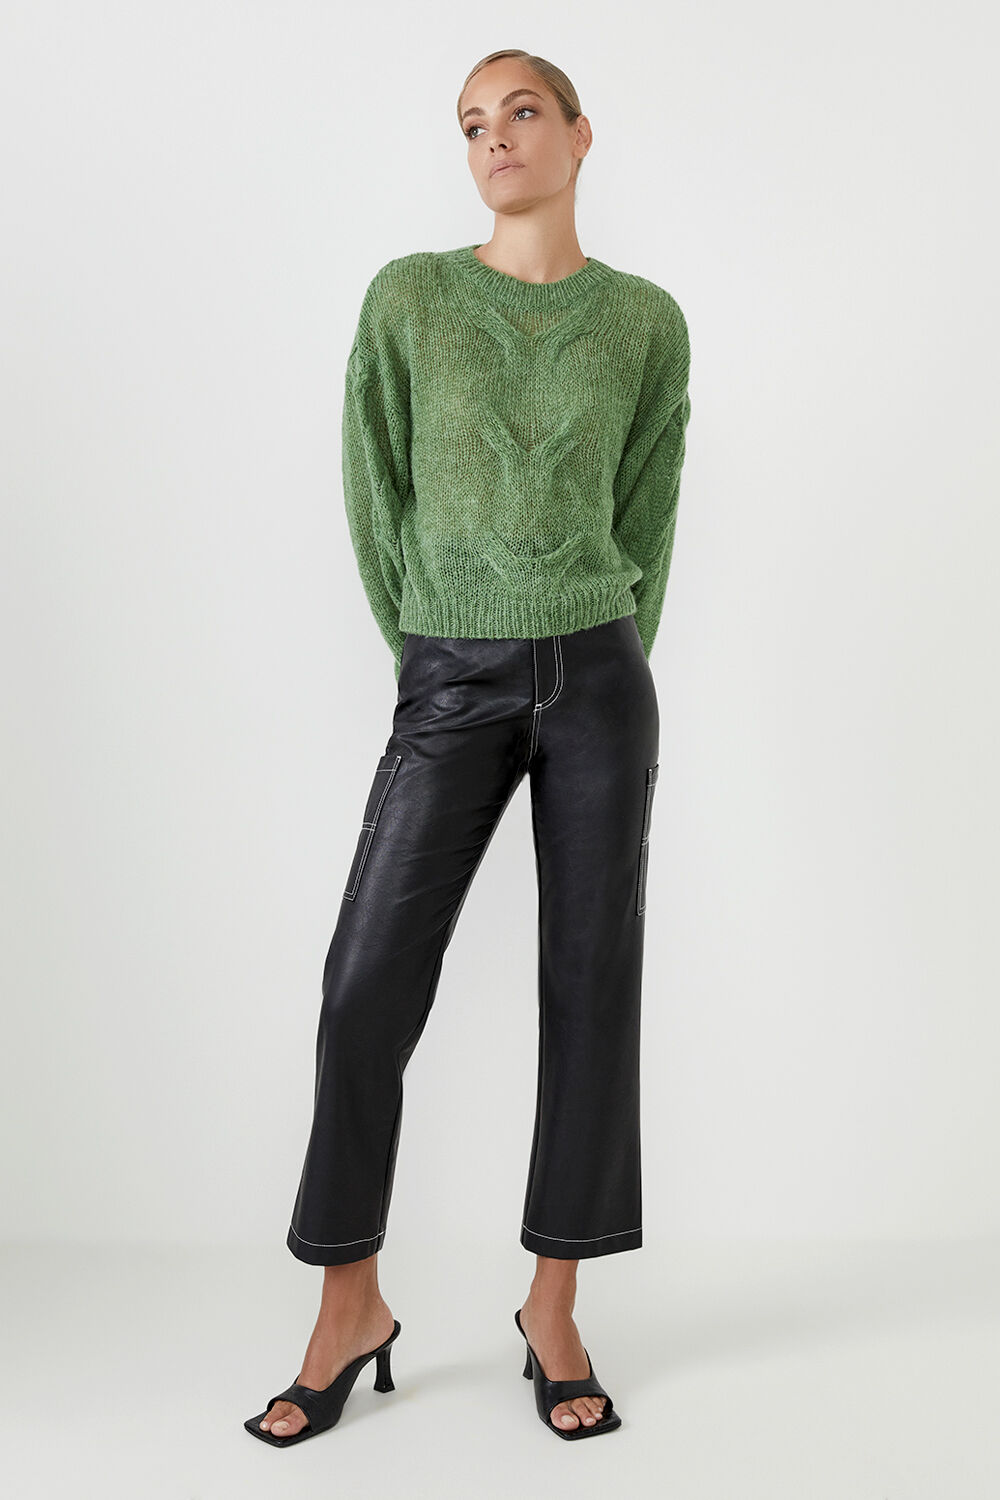 THE OVERSIZED CABLE KNIT  in colour EVERGREEN